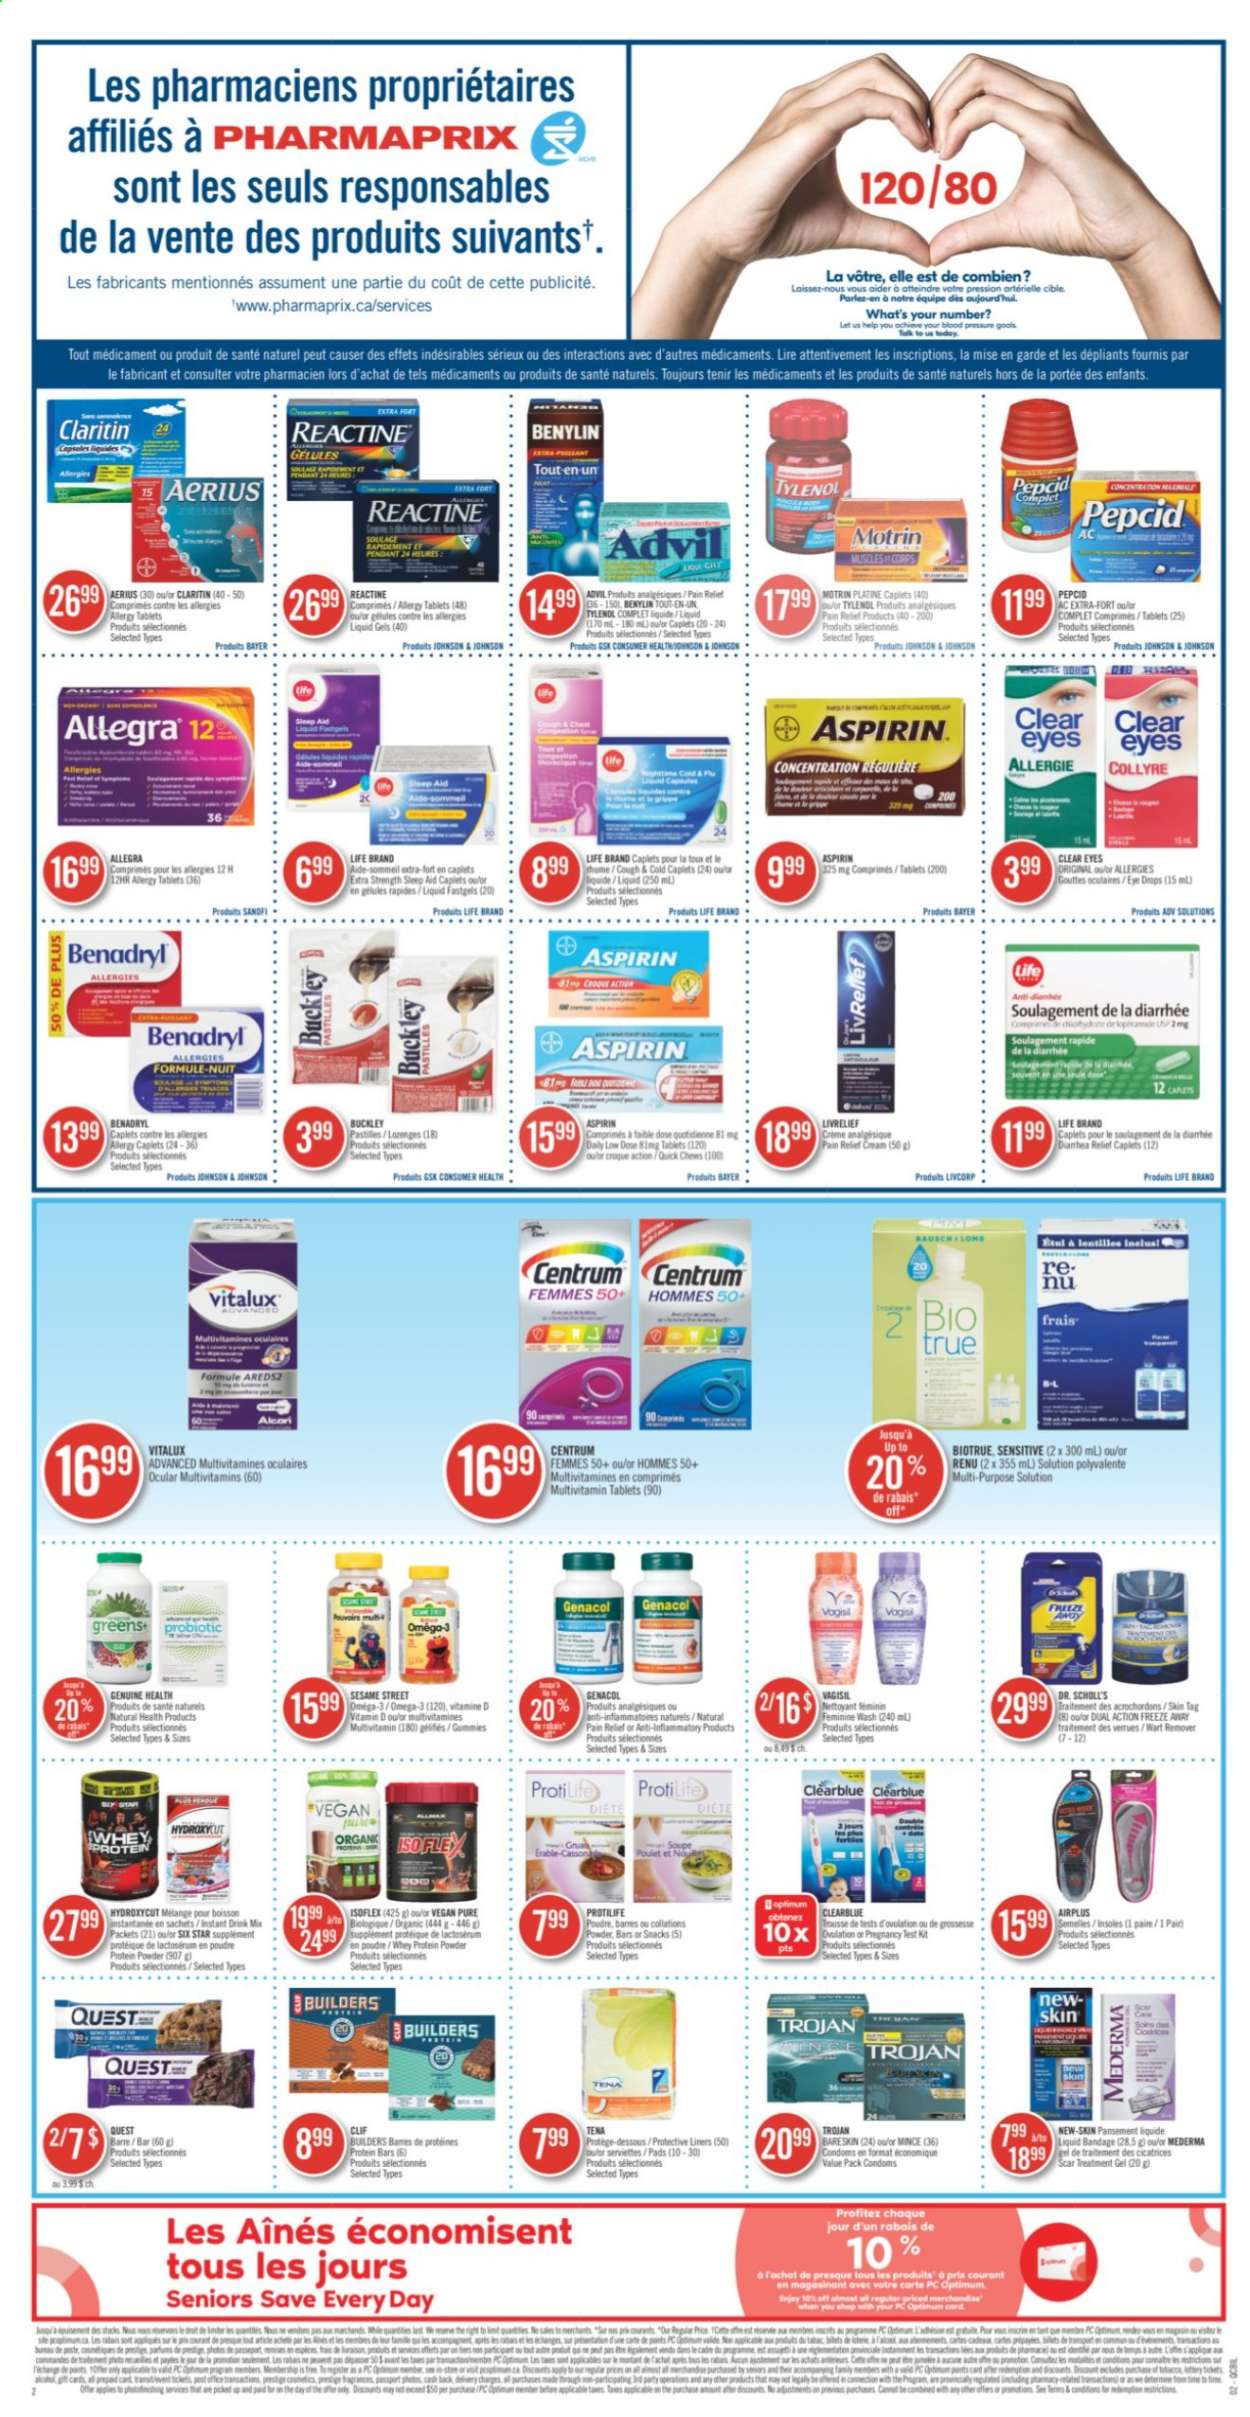 thumbnail - Pharmaprix Flyer - May 15, 2021 - May 20, 2021 - Sales products - chewing gum, pastilles, Sesame Street, protein bar, Johnson's, pendant, pain relief, multivitamin, Tylenol, Pepcid, Omega-3, Biotrue, eye drops, Advil Rapid, whey protein, Low Dose, aspirin, Centrum, Bayer, Benylin, Motrin, Dr. Scholl's. Page 2.